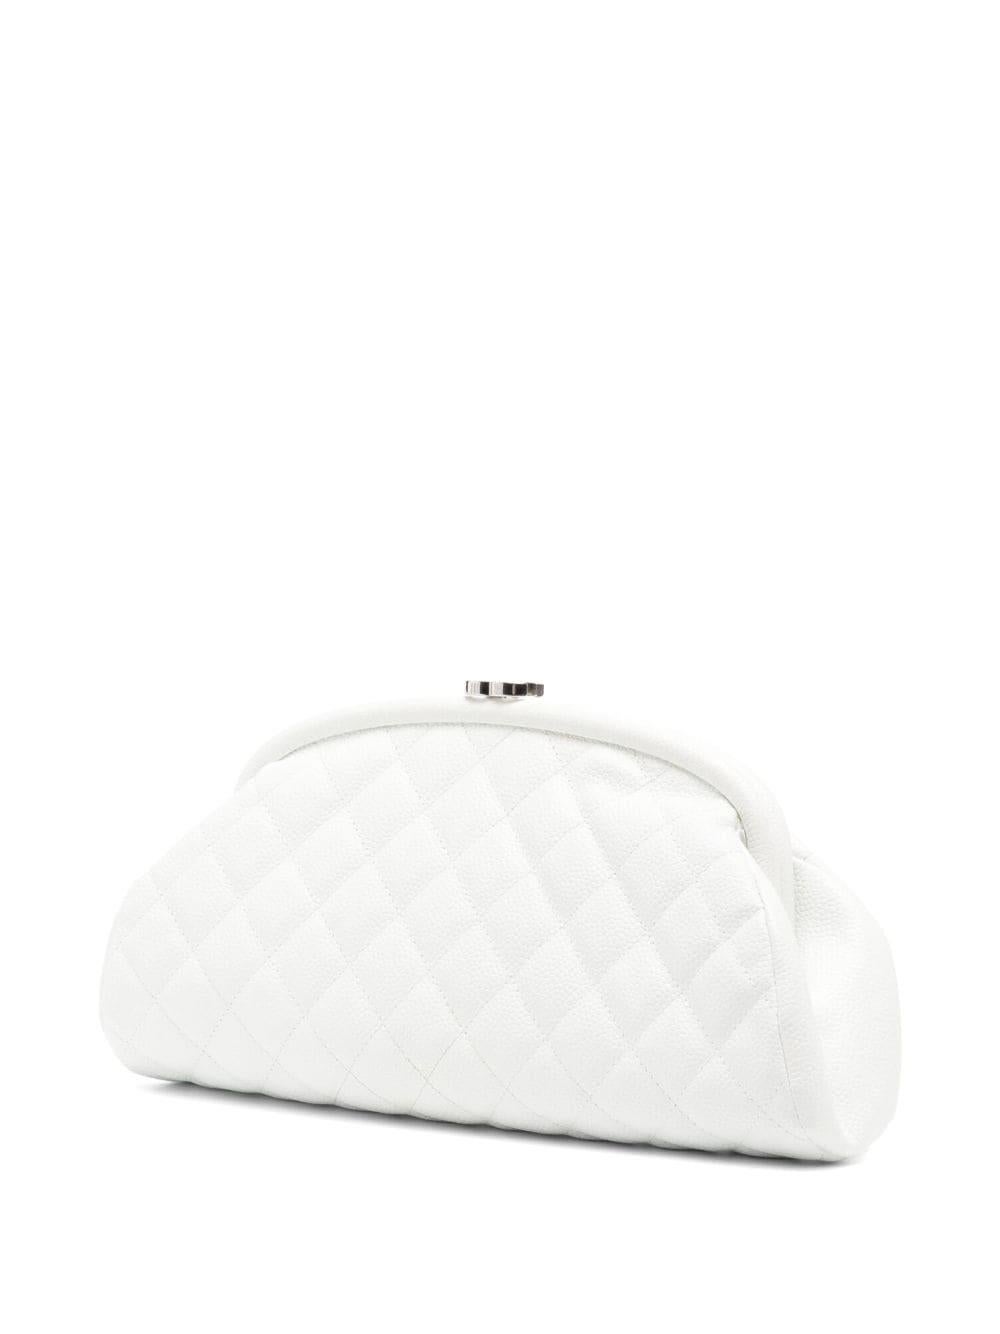 This classic Chanel white Clutch is the perfect addition to any evening look. Crafted in France in 2006 from high-grade leather, the iconic quilted design is among Gabrielle Chanel's most beloved. Featuring a push-lock closure, silver-tone hardware,